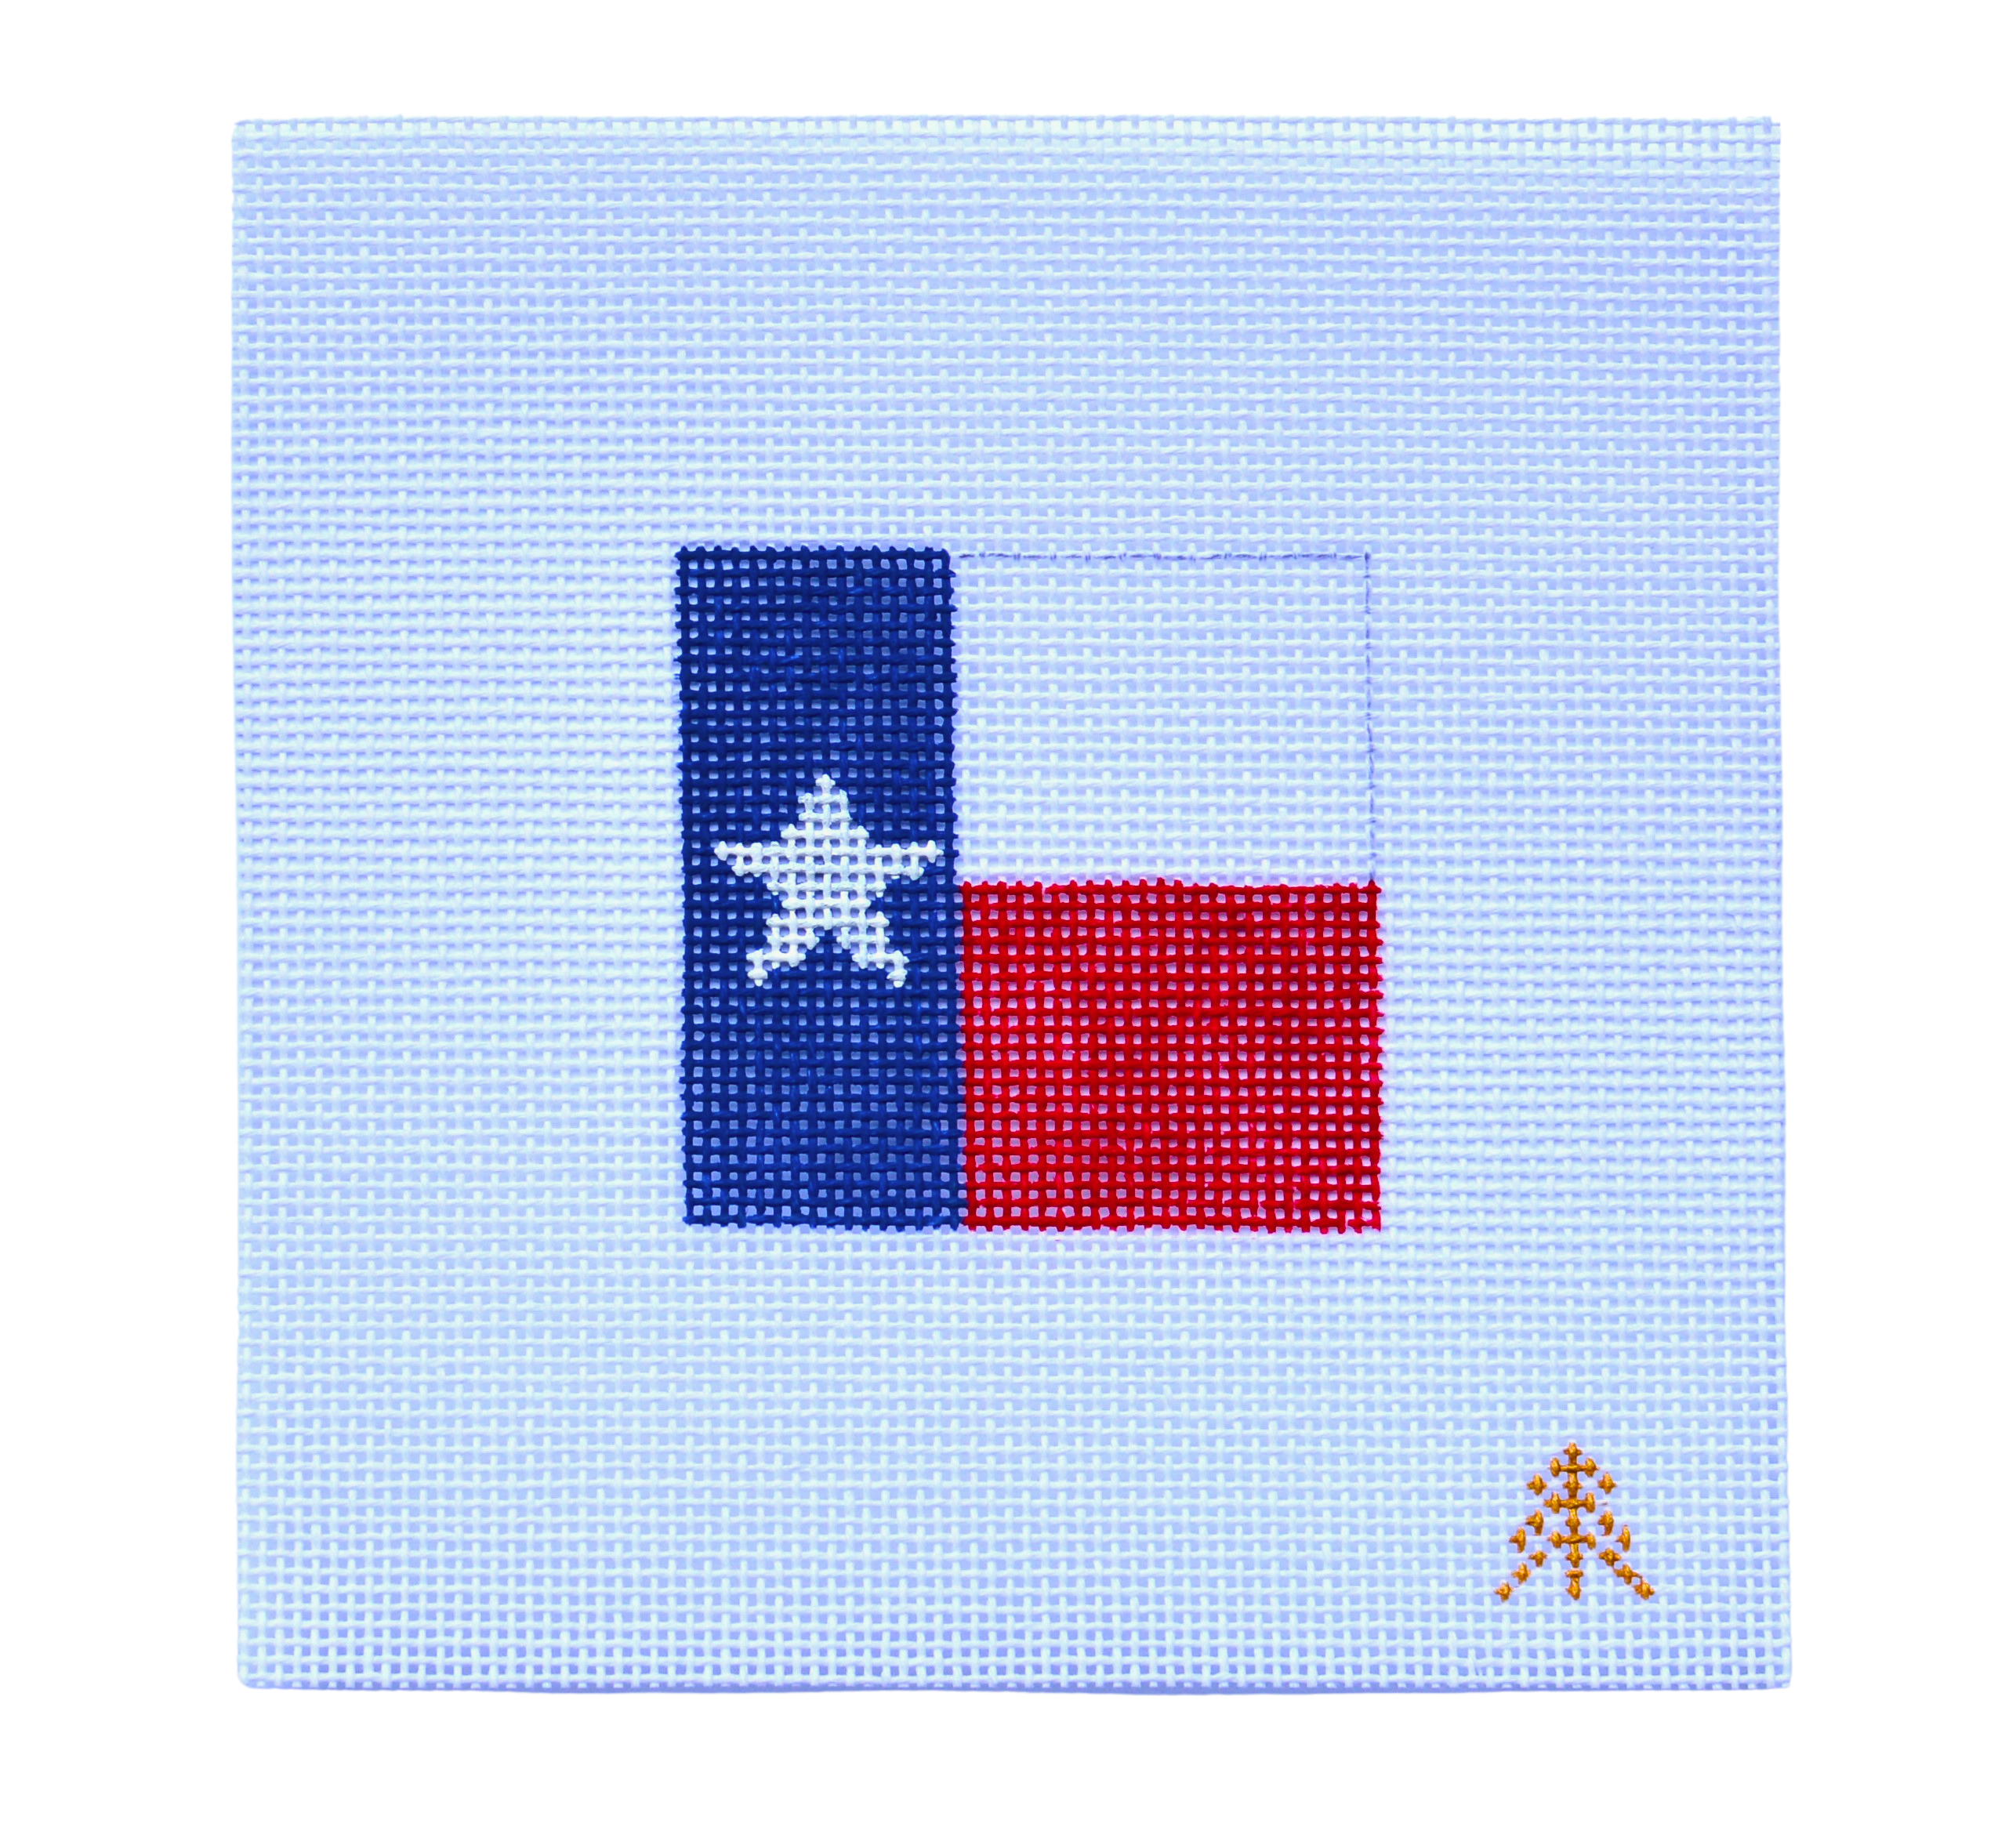 Texas State Flag Can Cozy Kit- Needlepoint Canvas